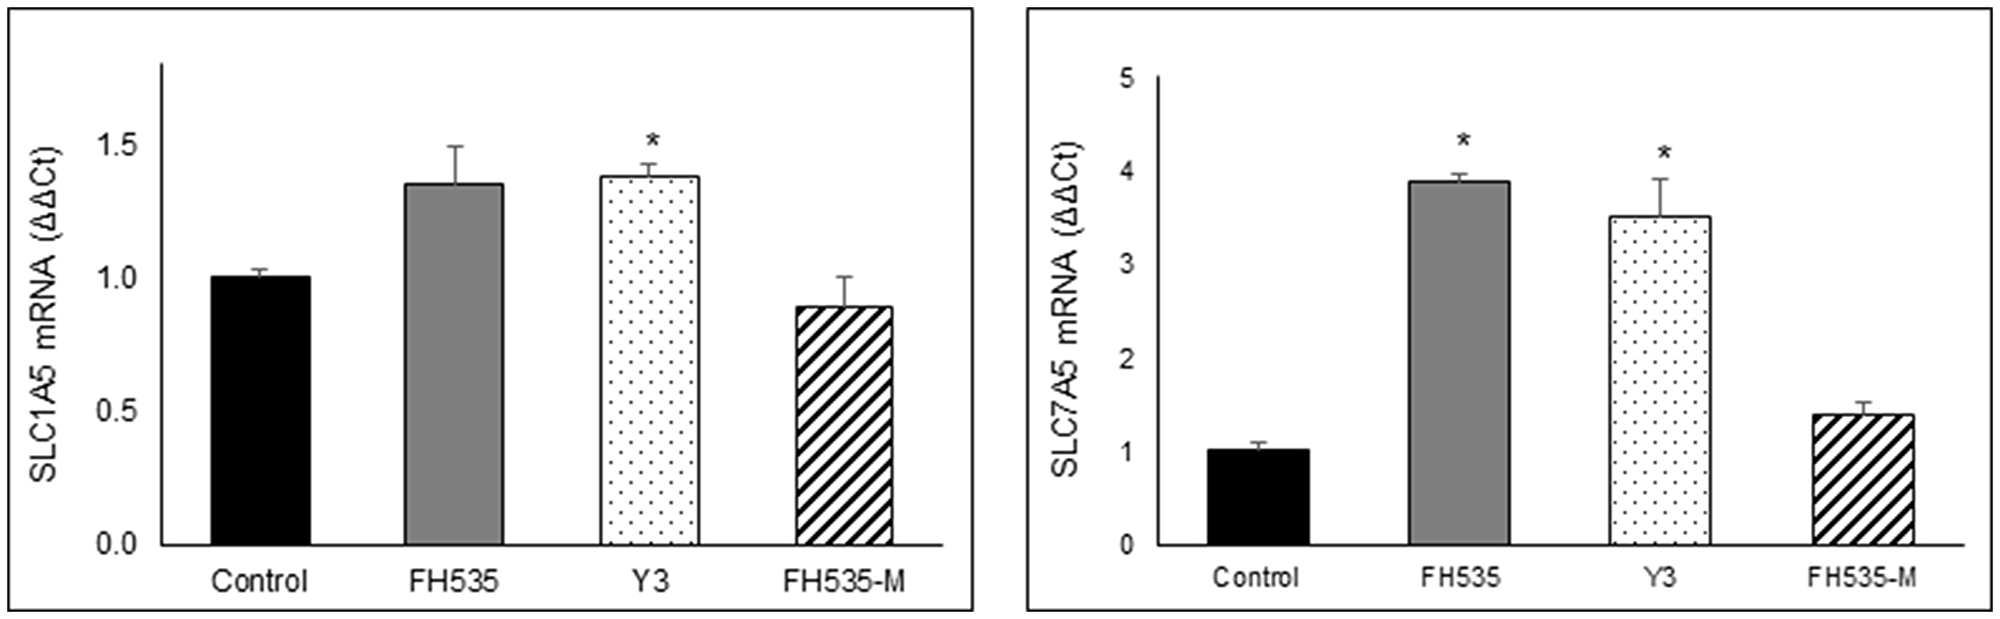 Figure 10: Relative expression of SLC1A5 and SLC7A5 mRNA were determined by real time-PCR after 48 treatment of Huh7 cells with 10 μM of the indicated compounds using B2M gene for normalization.